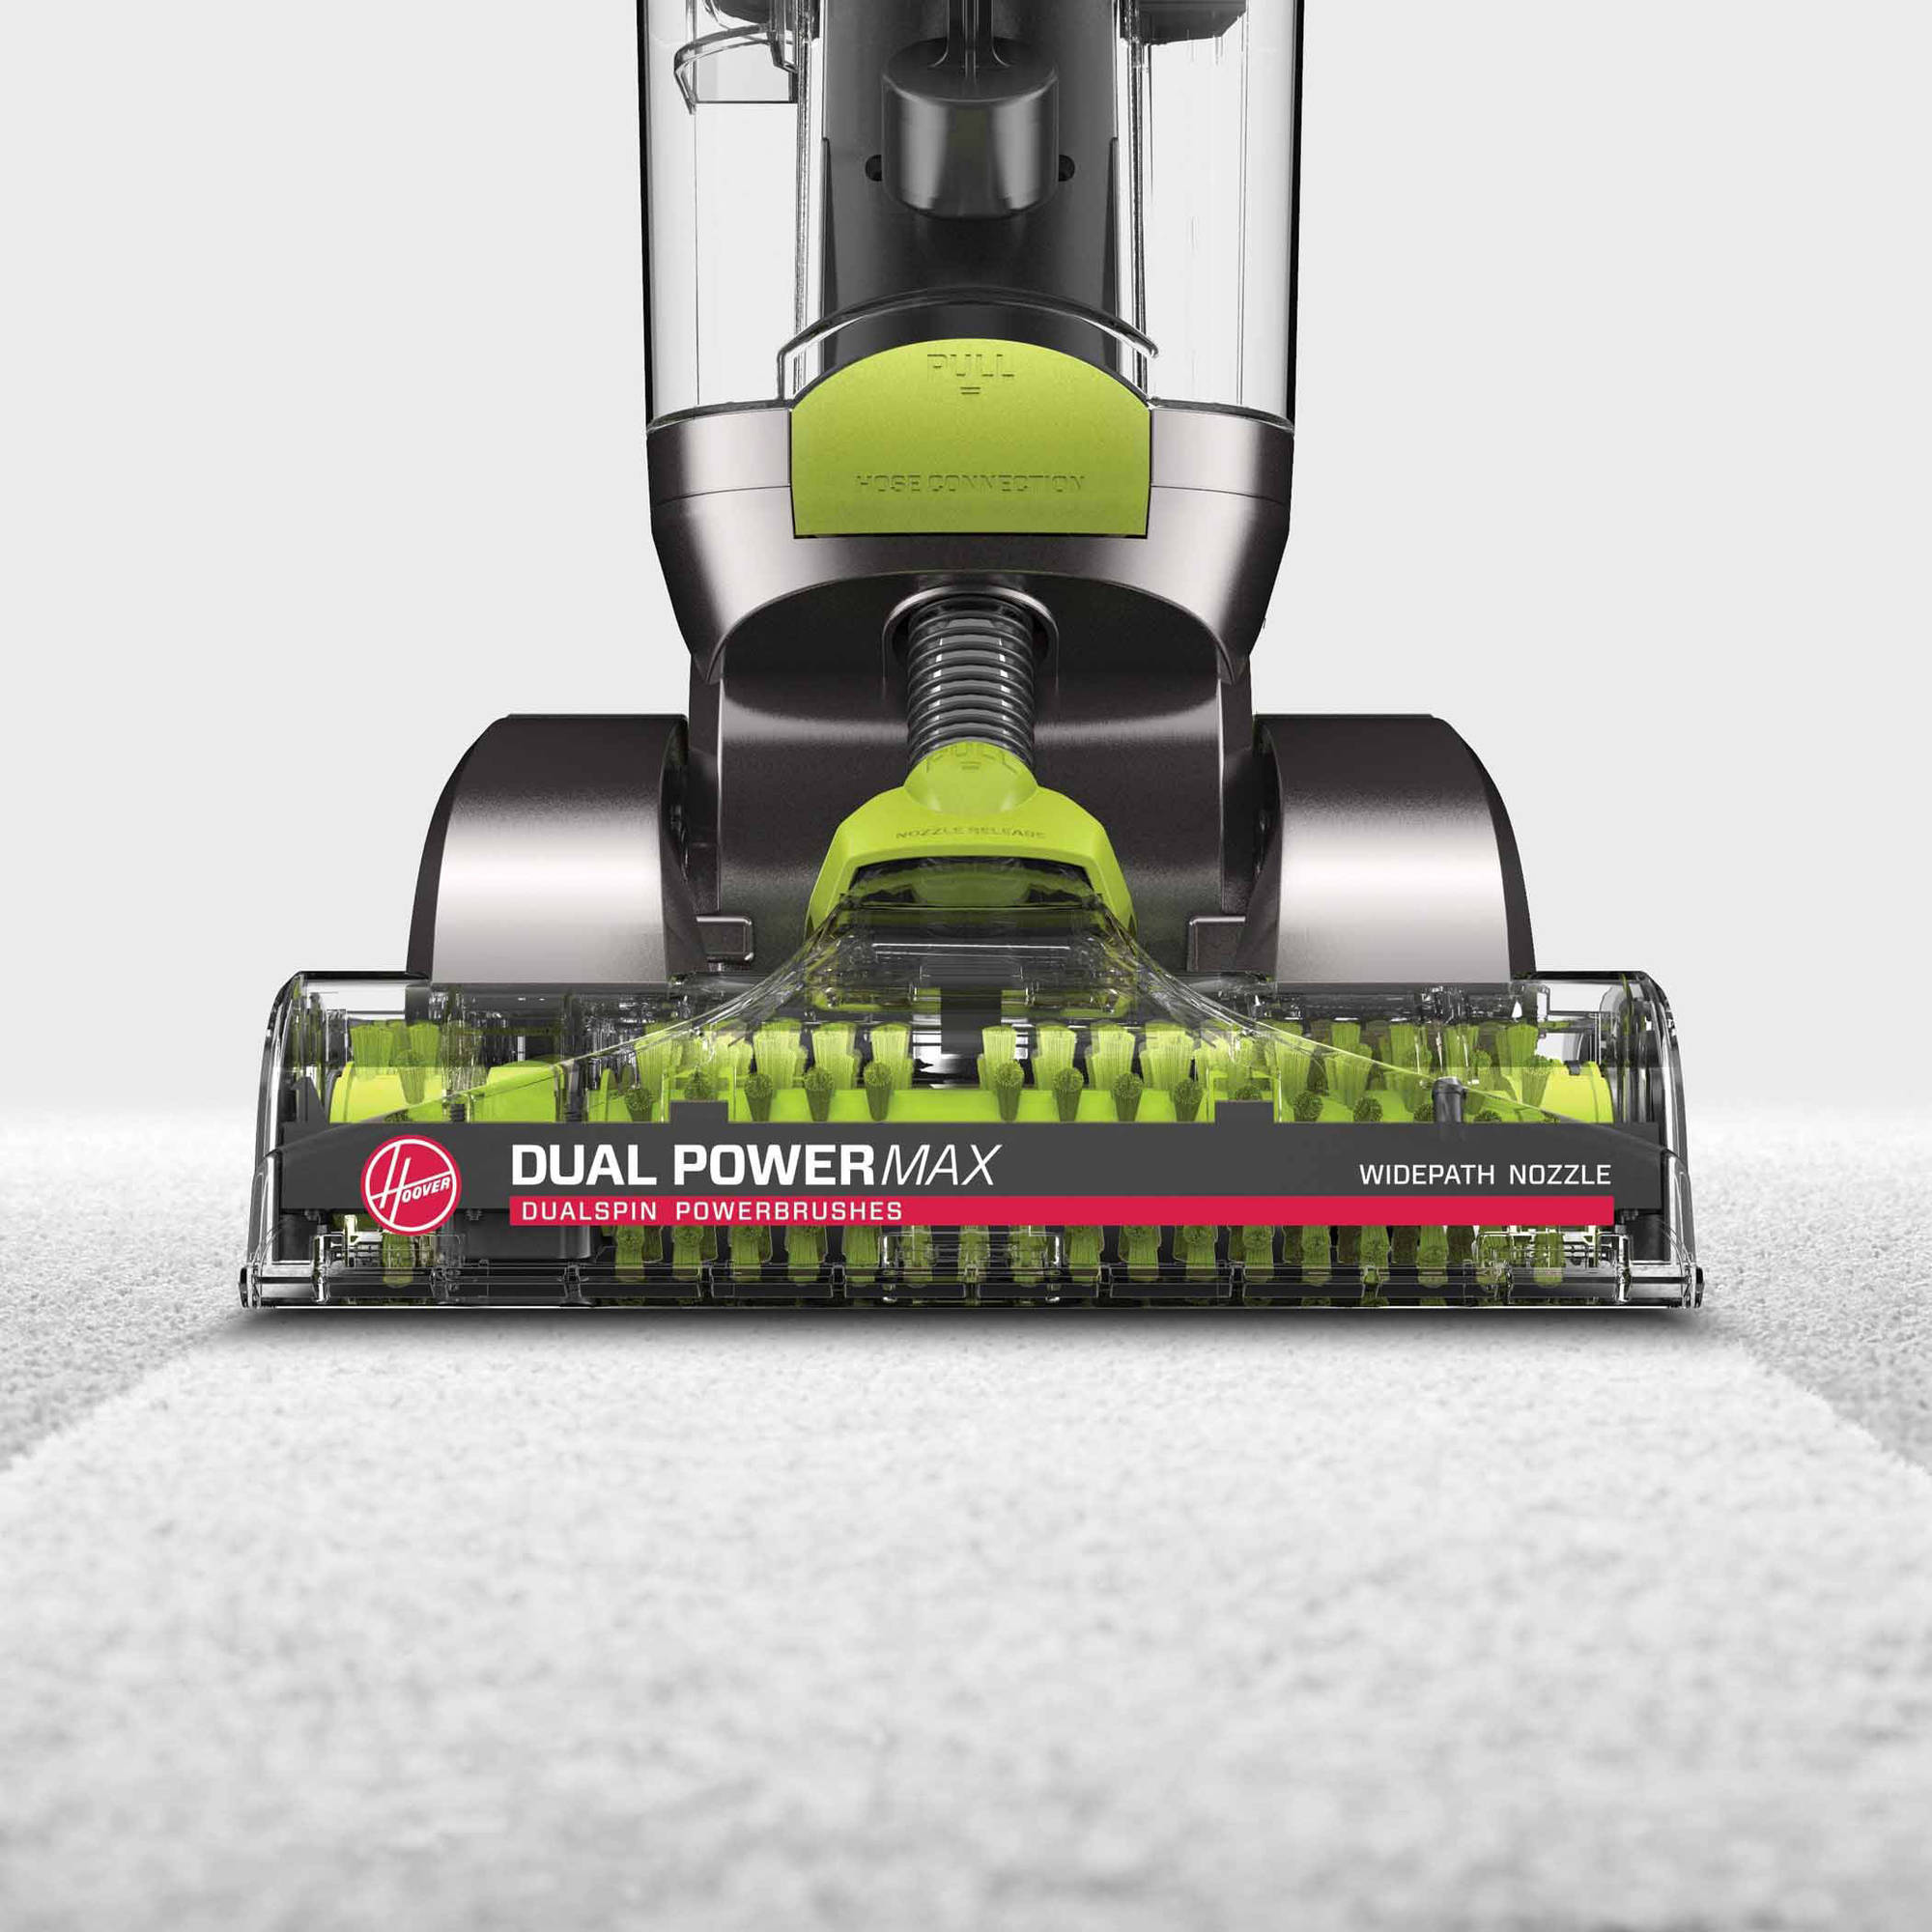 Hoover Dual Power Max Pet Carpet Cleaner w/ Antimicrobial Brushes, FH51001 - image 4 of 10